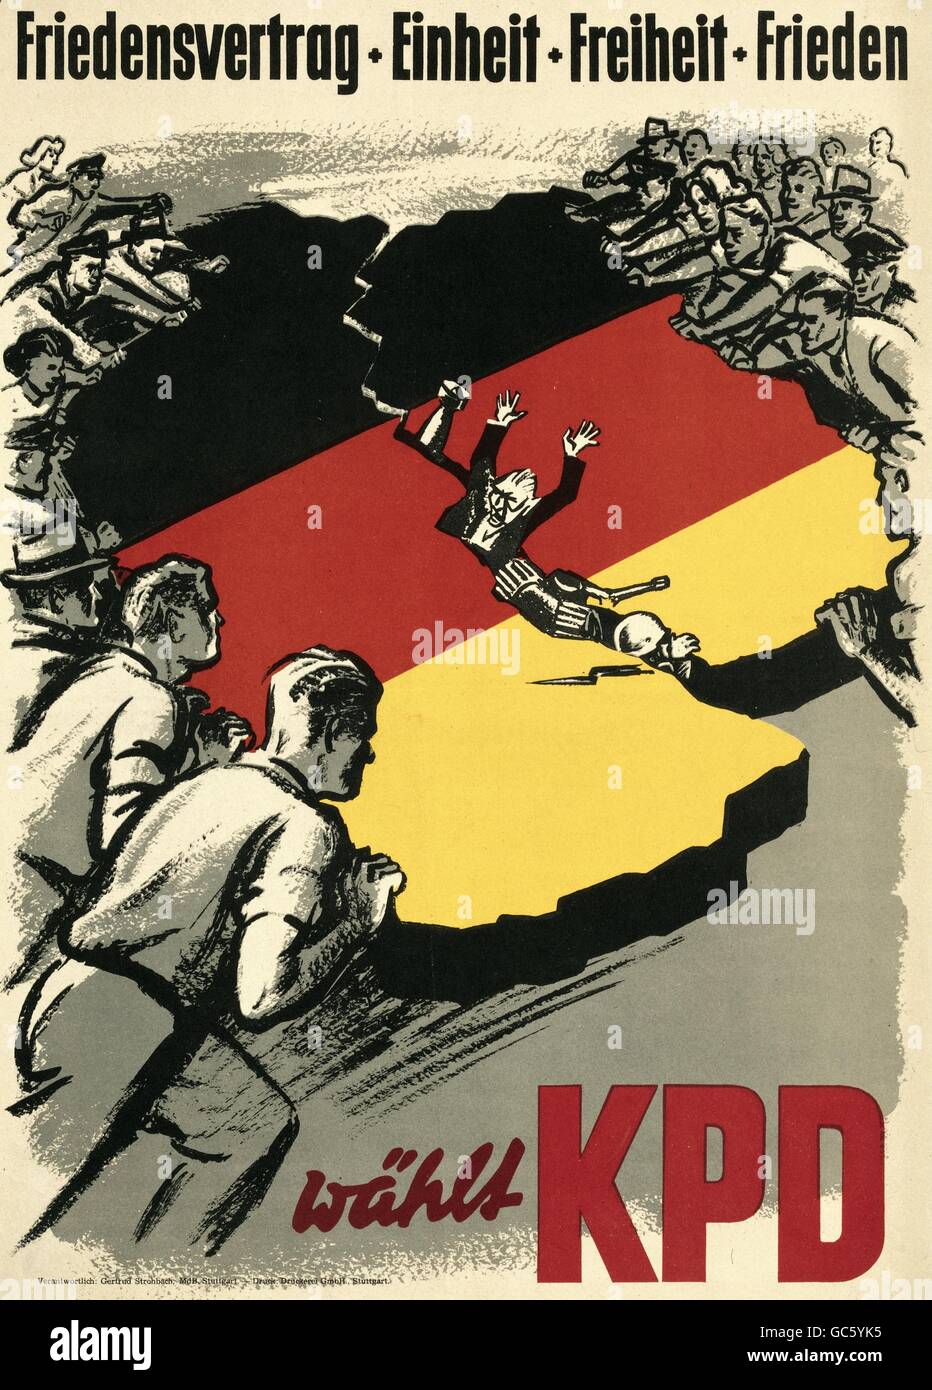 geography / travel, Germany, politics, political parties, Communist Party of Germany (KPD), poster 'Friedensvertrag +Einheit +Freiheit +Frieden', Stuttgart, circa 1952, Additional-Rights-Clearences-Not Available Stock Photo